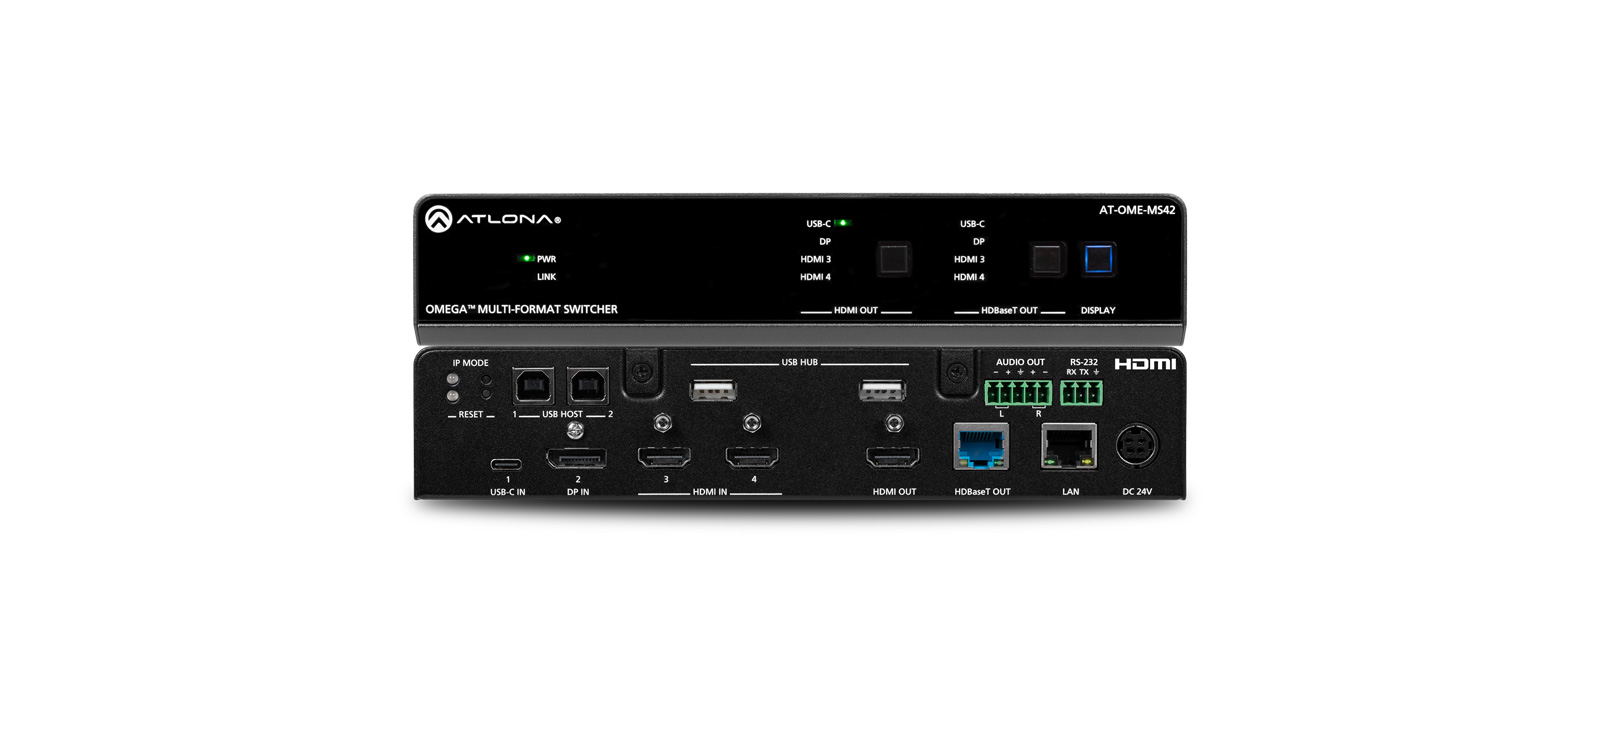 HDMI SWITCHER 5 PORT WITH REMOTE (OEM)